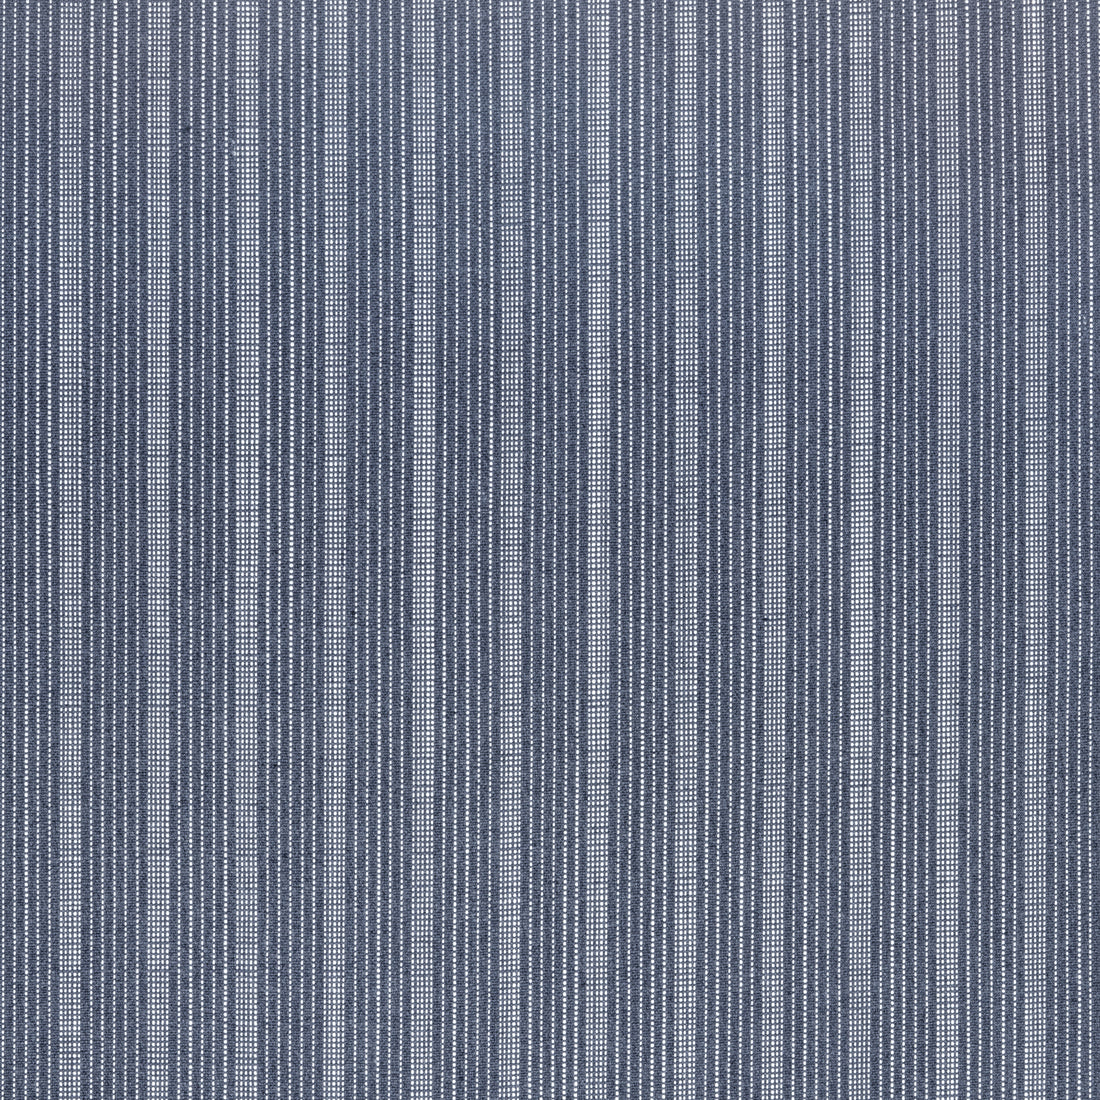 Ebro Stripe fabric in marine color - pattern number W8510 - by Thibaut in the Villa collection